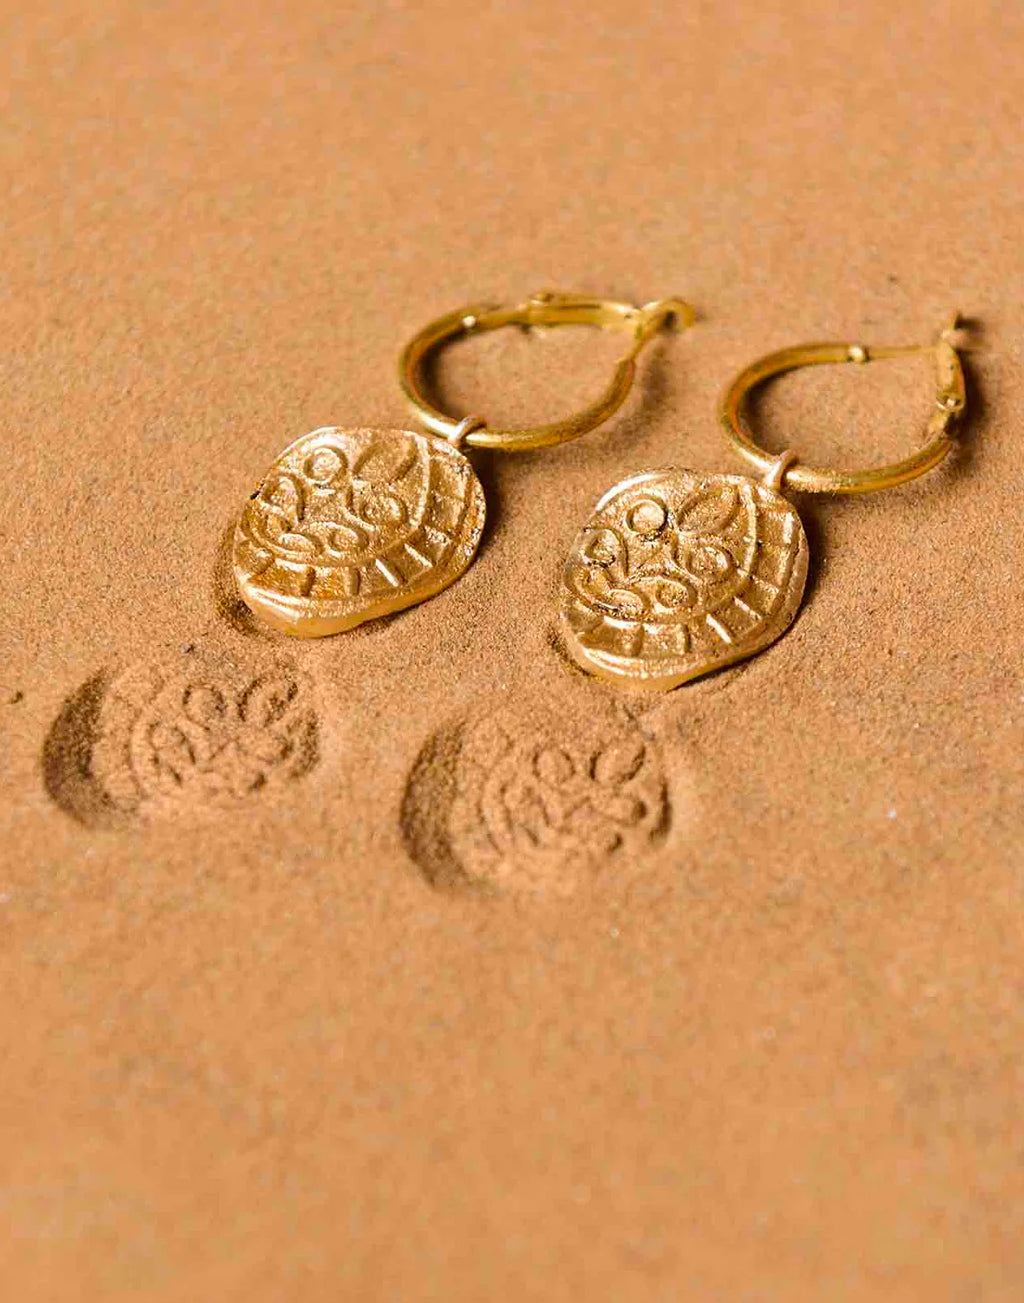 Fossil Hoops 4 - Statement Earrings - Gold-Plated & Hypoallergenic Jewellery - Made in India - Dubai Jewellery - Dori